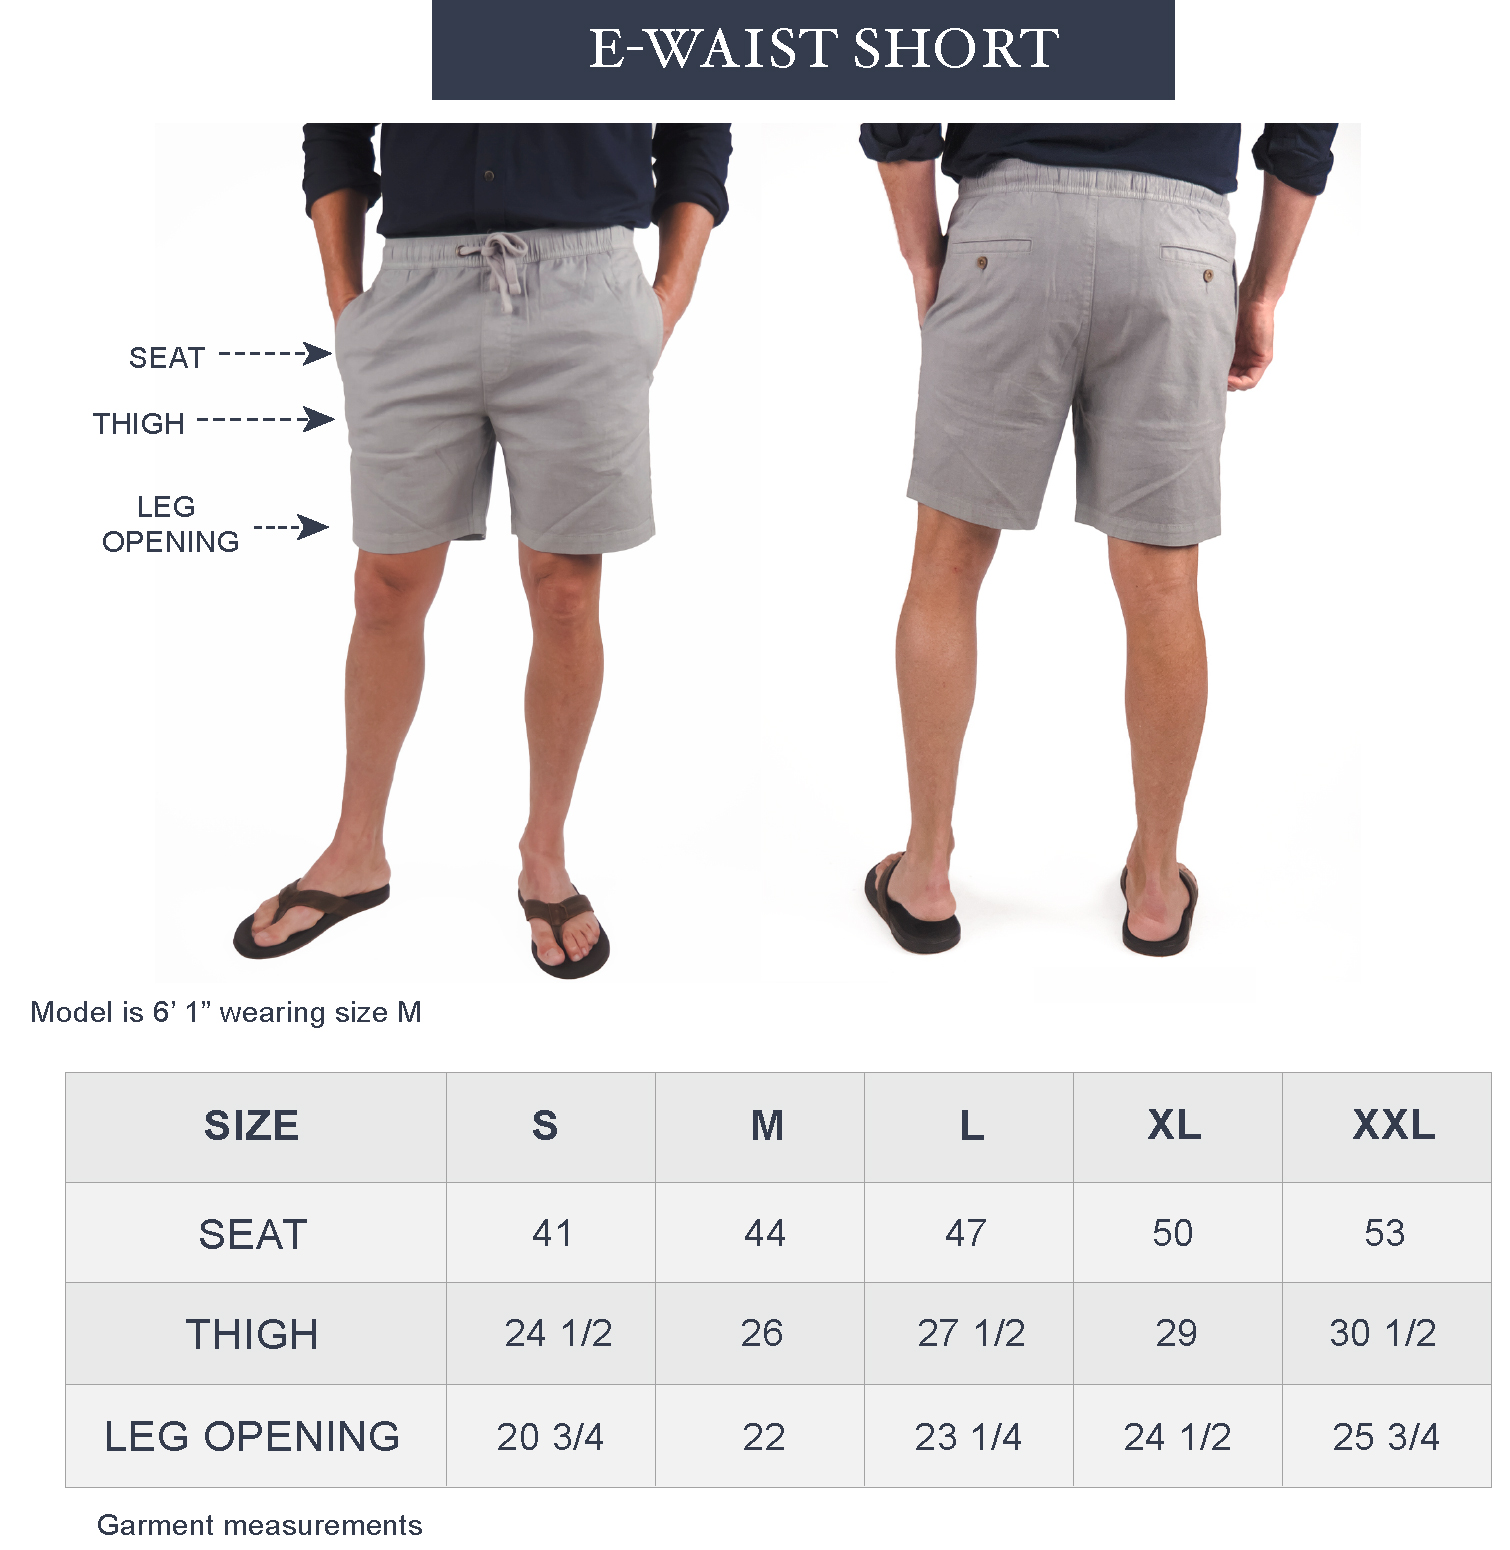 Stylish 5 Inch Inseam Shorts that Are Made for Good Comfort 